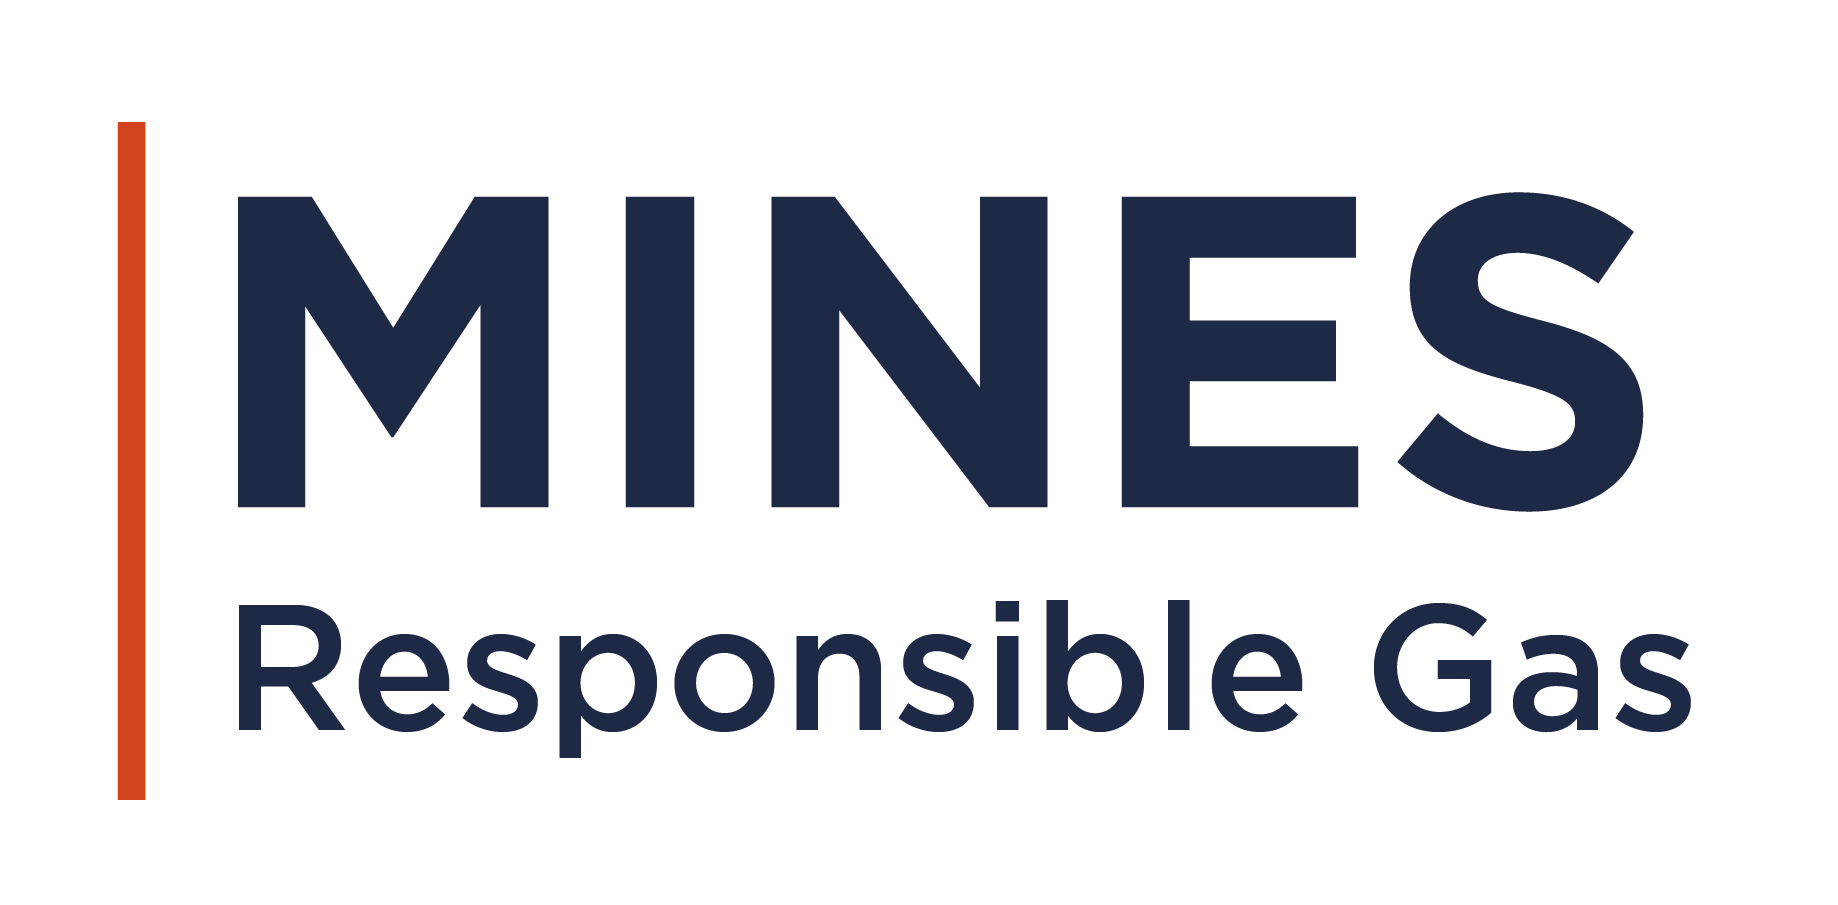 Mines Responsible Gas Initiative